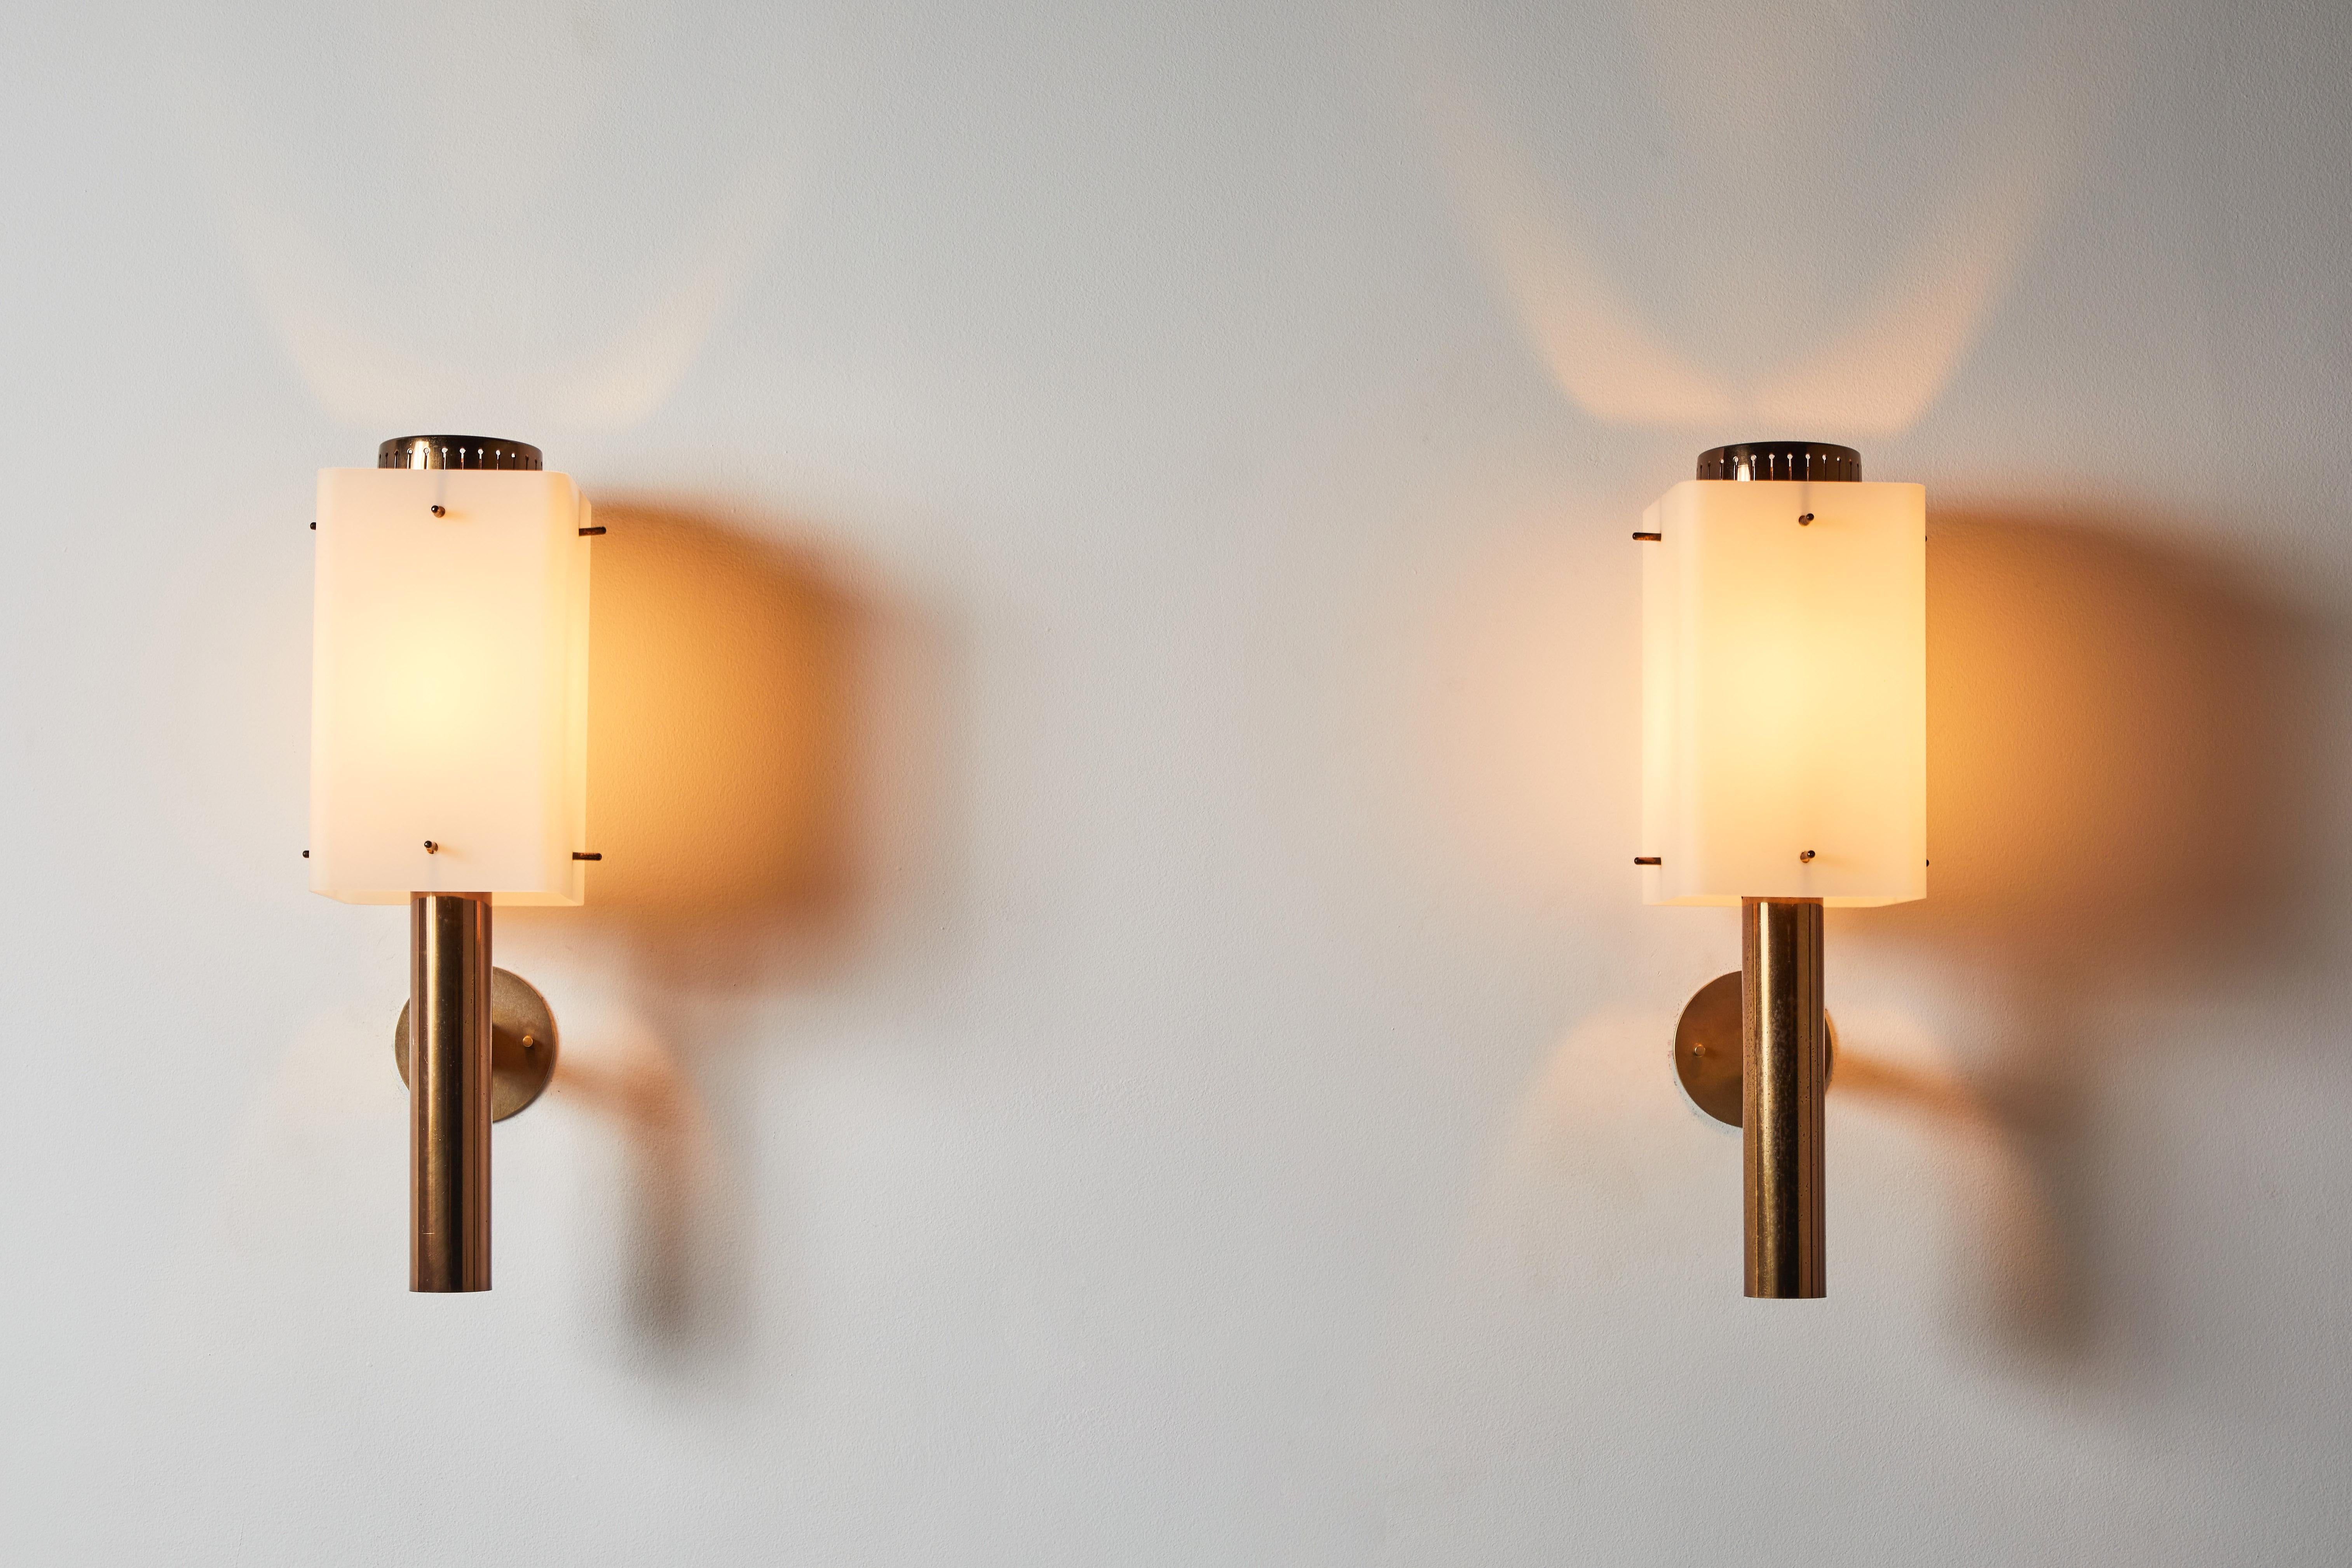 Two pairs of sconces by Stilnovo. Manufactured in Italy, circa 1960s. Brushed satin glass diffuser with brass frame, custom brass back plates. Rewired for U.S. junction boxes. Each light takes one E27 100w maximum bulb. Bulbs provided as a one time